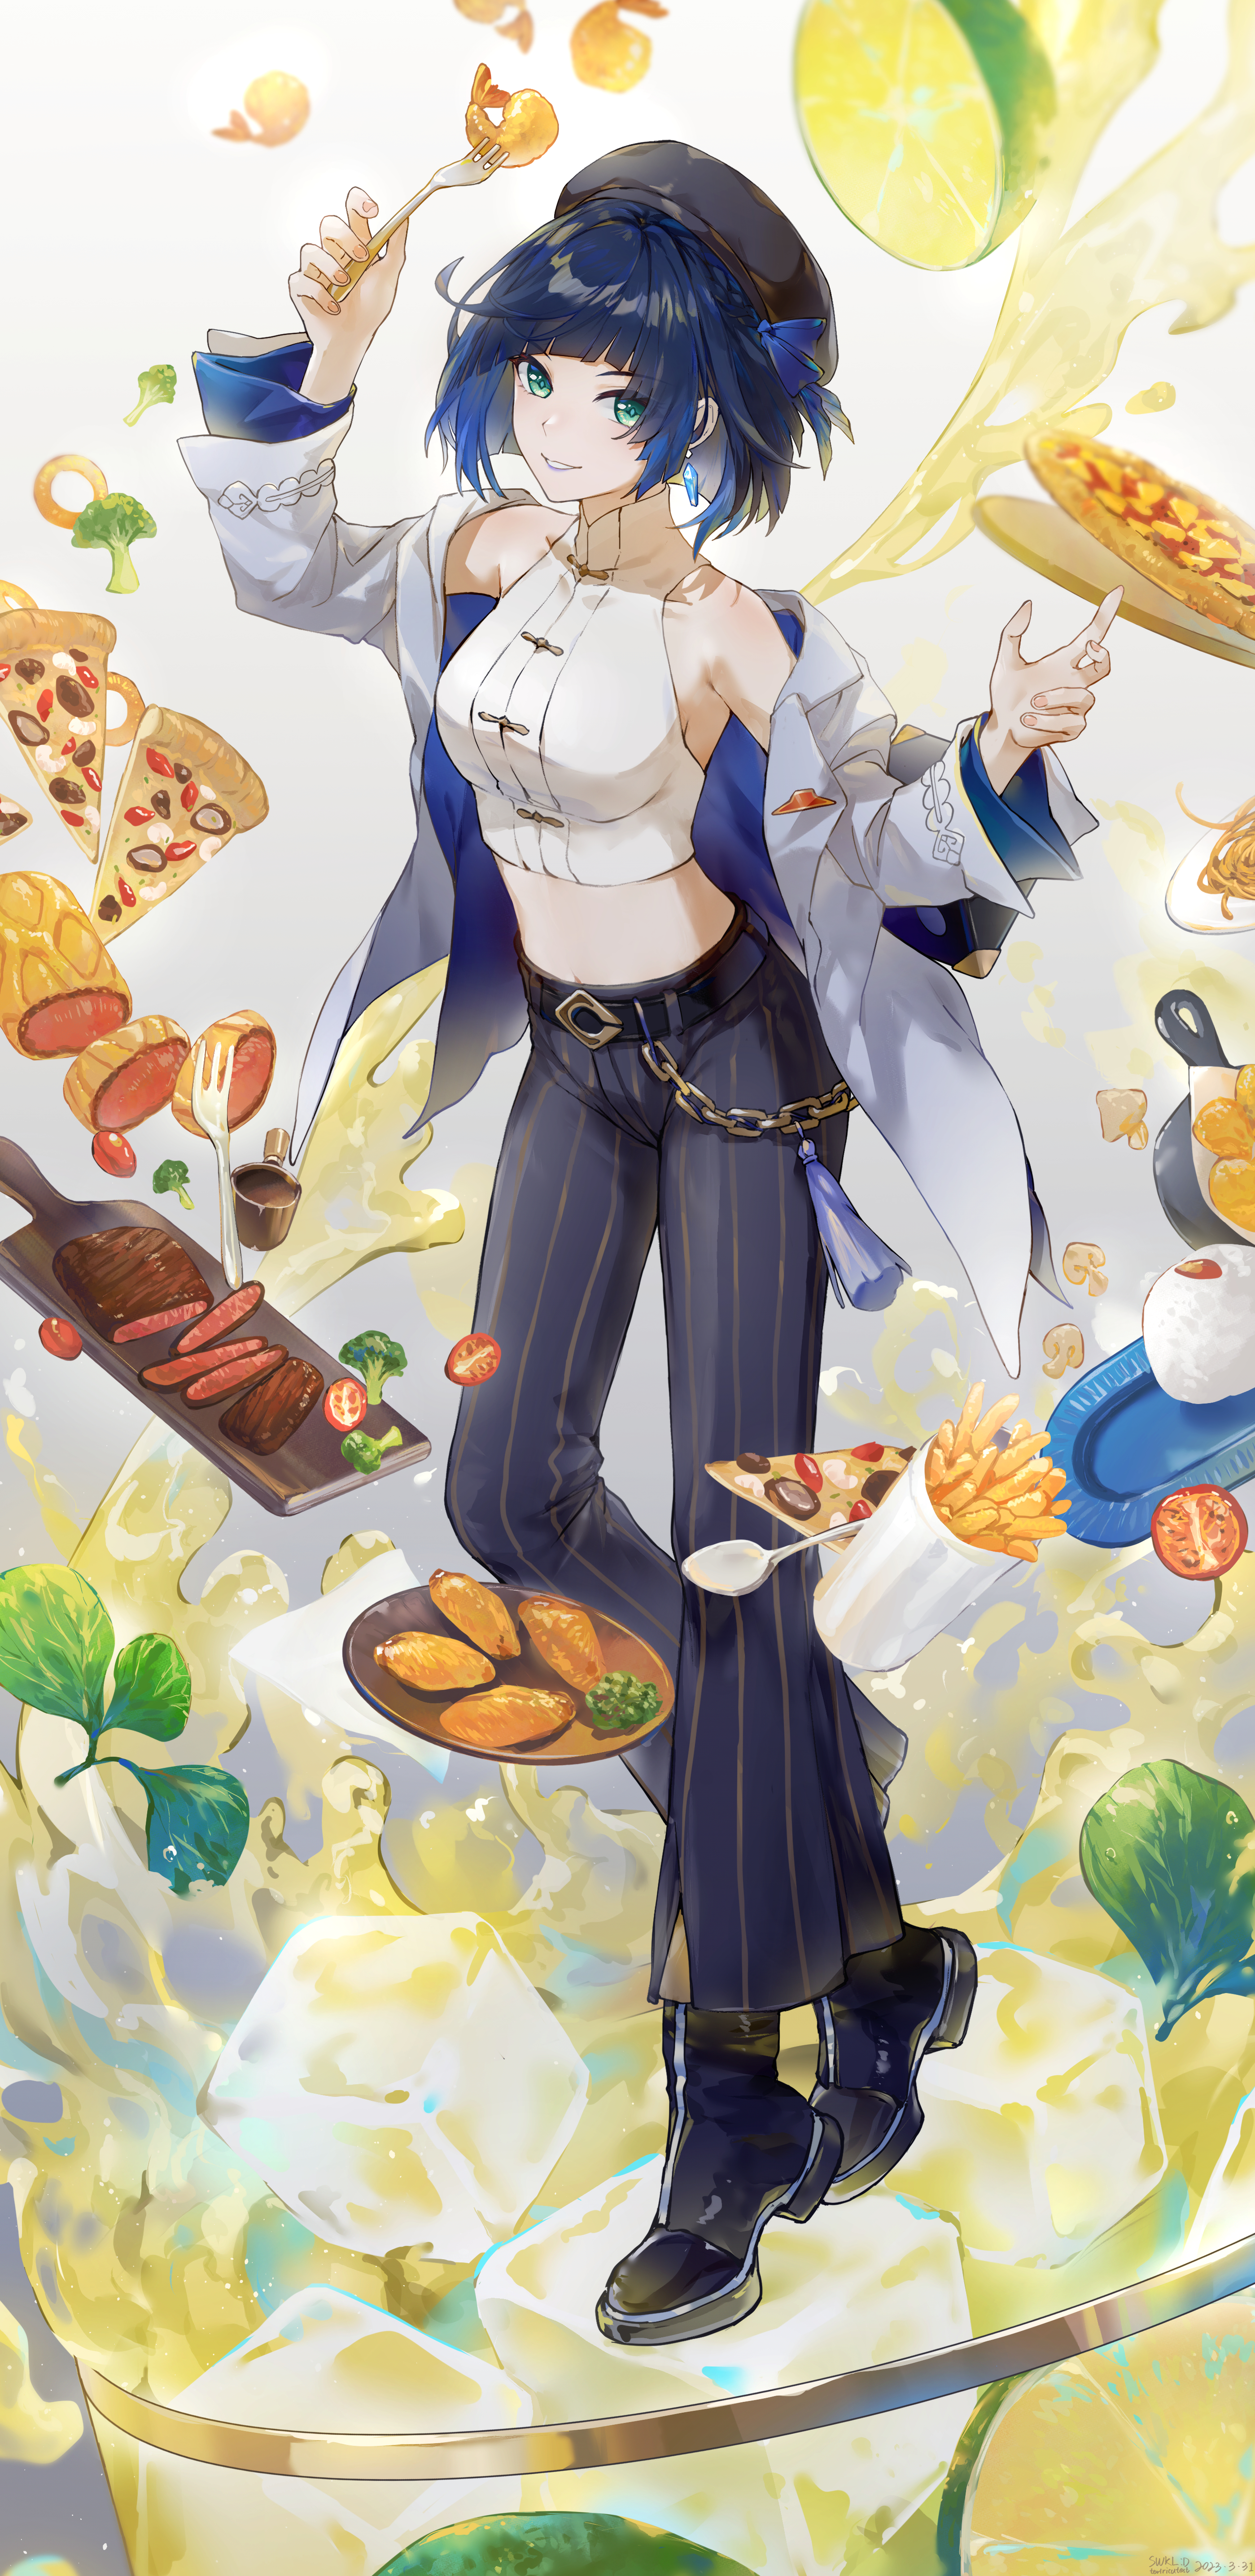 Anime 2797x5741 anime girls Genshin Impact Yelan (Genshin Impact) portrait display food pizza fries ice cubes leaves looking at viewer short hair earring smiling broccoli fork meat tomatoes mushroom noodles shrimp hat